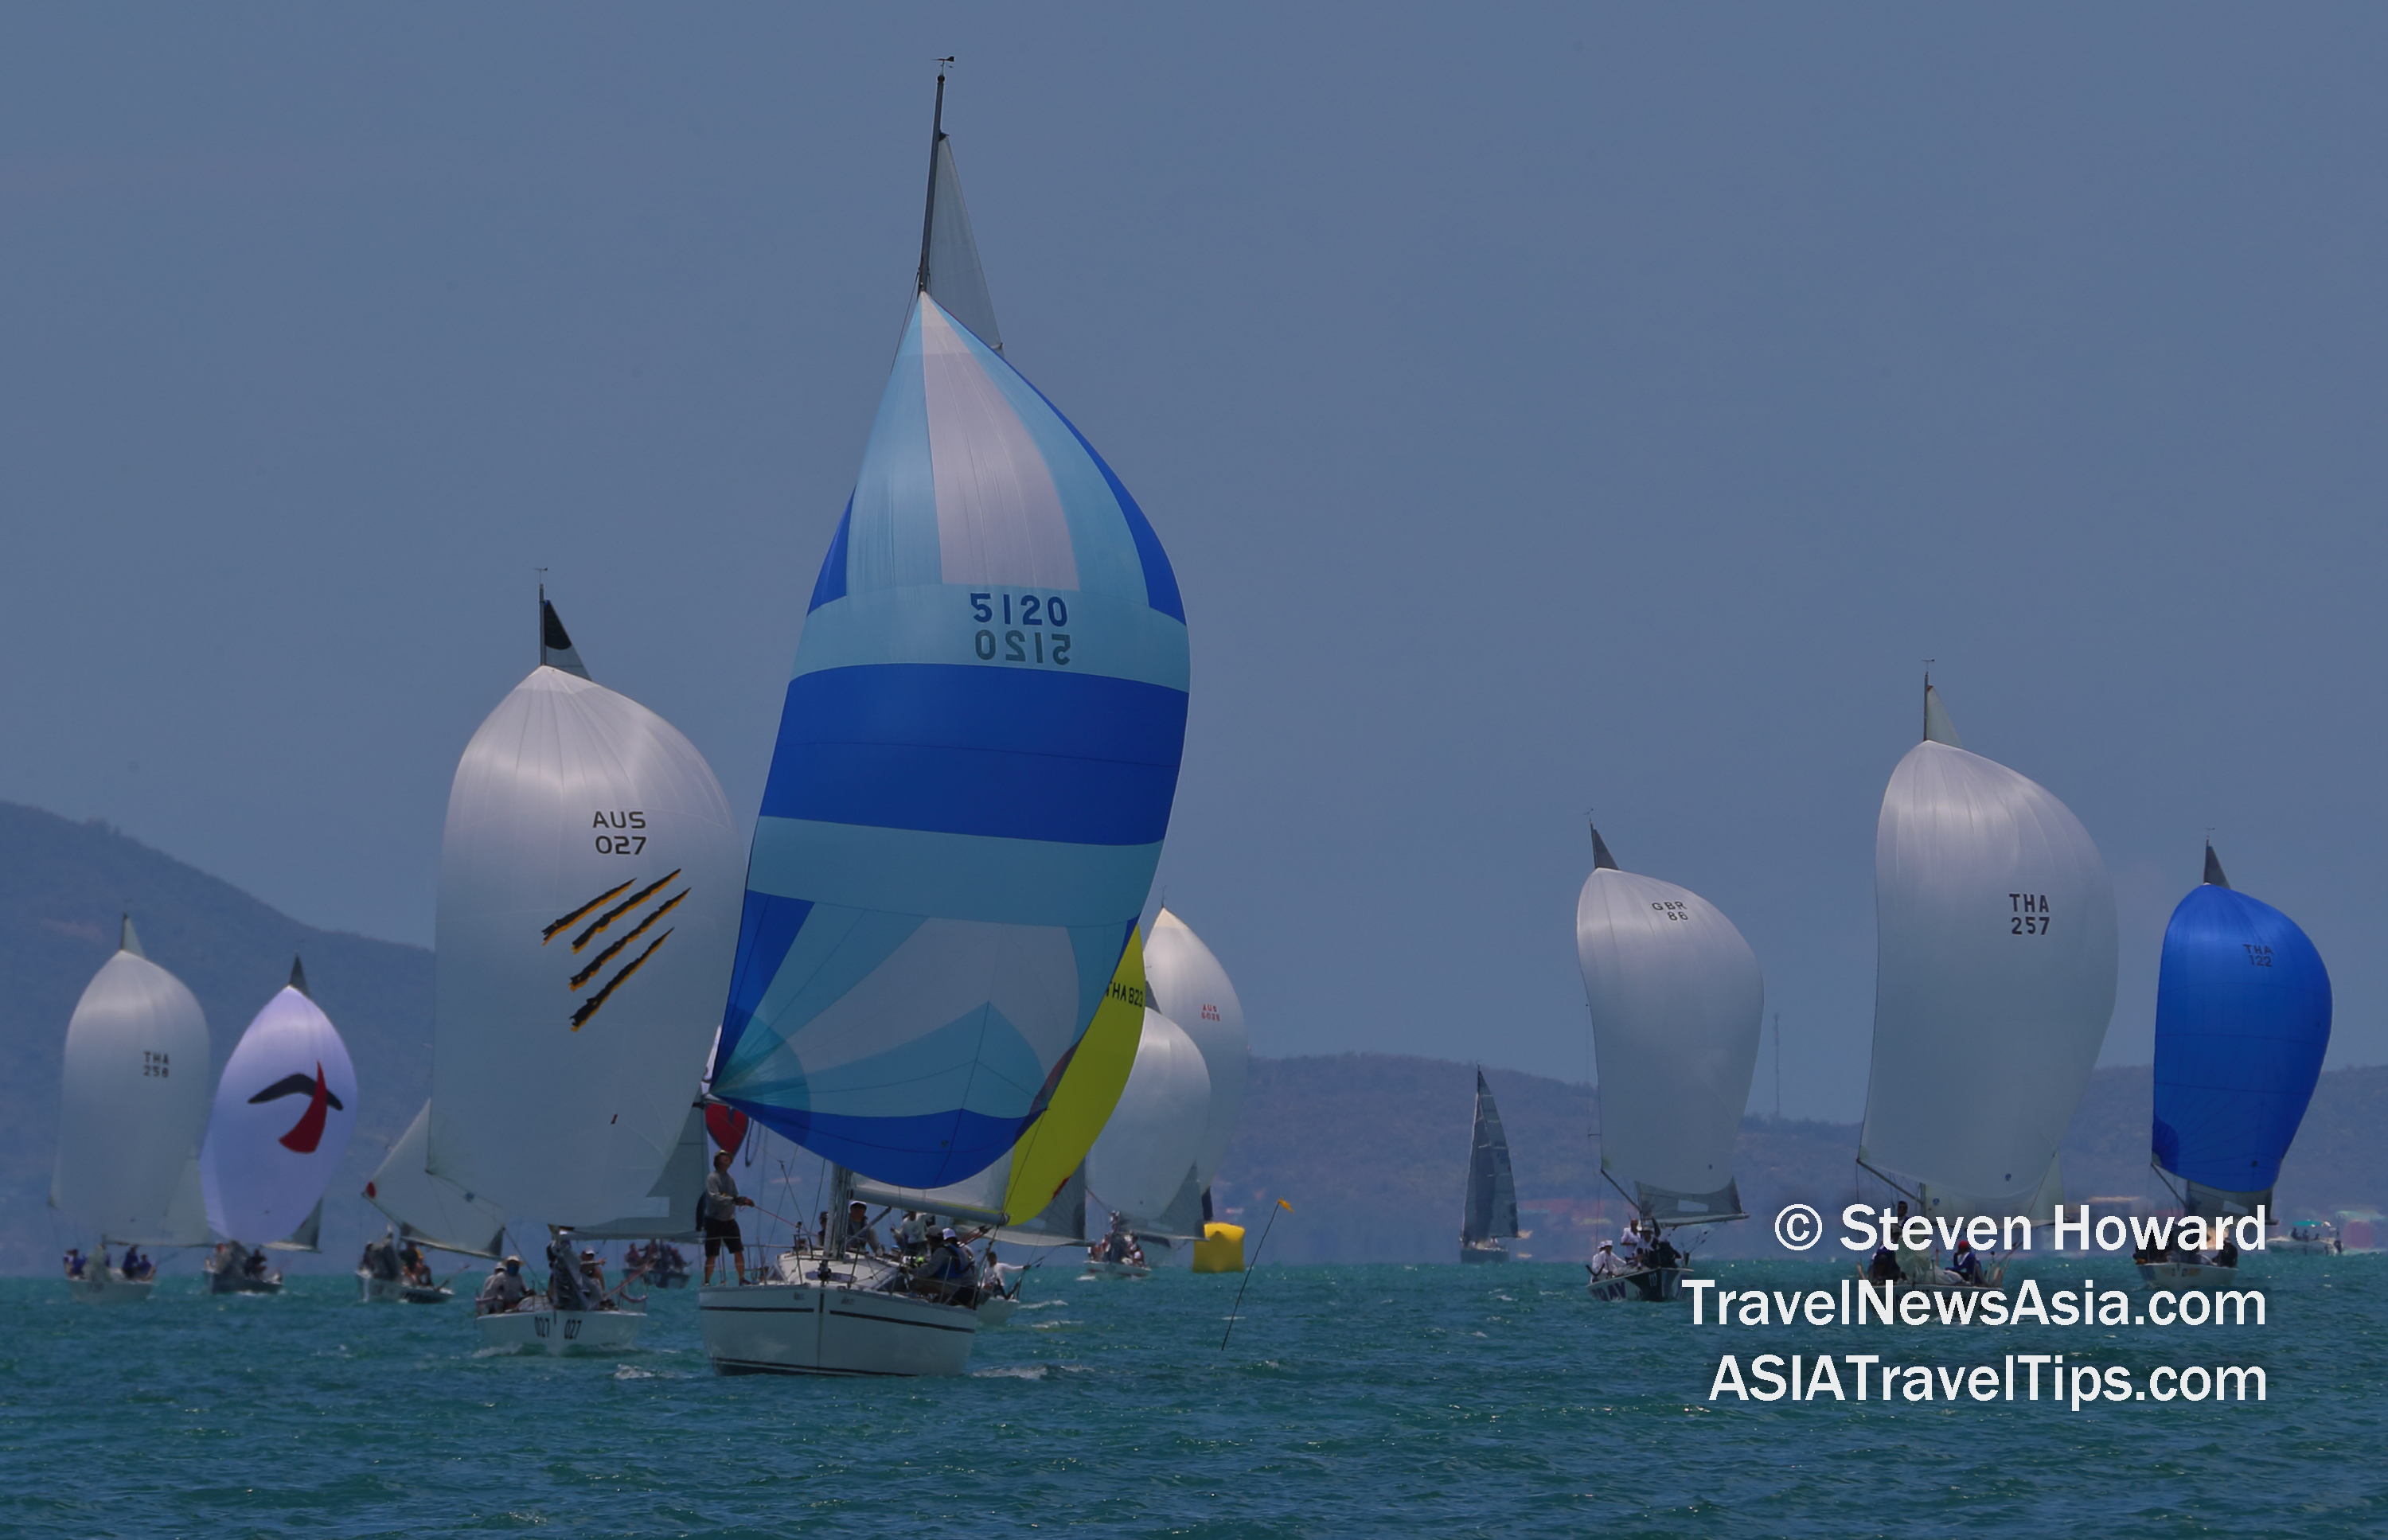 Yachts compete in the Top of the Gulf Regatta 2019 in Pattaya, Thailand. Picture by Steven Howard of TravelNewsAsia.com Click to enlarge.